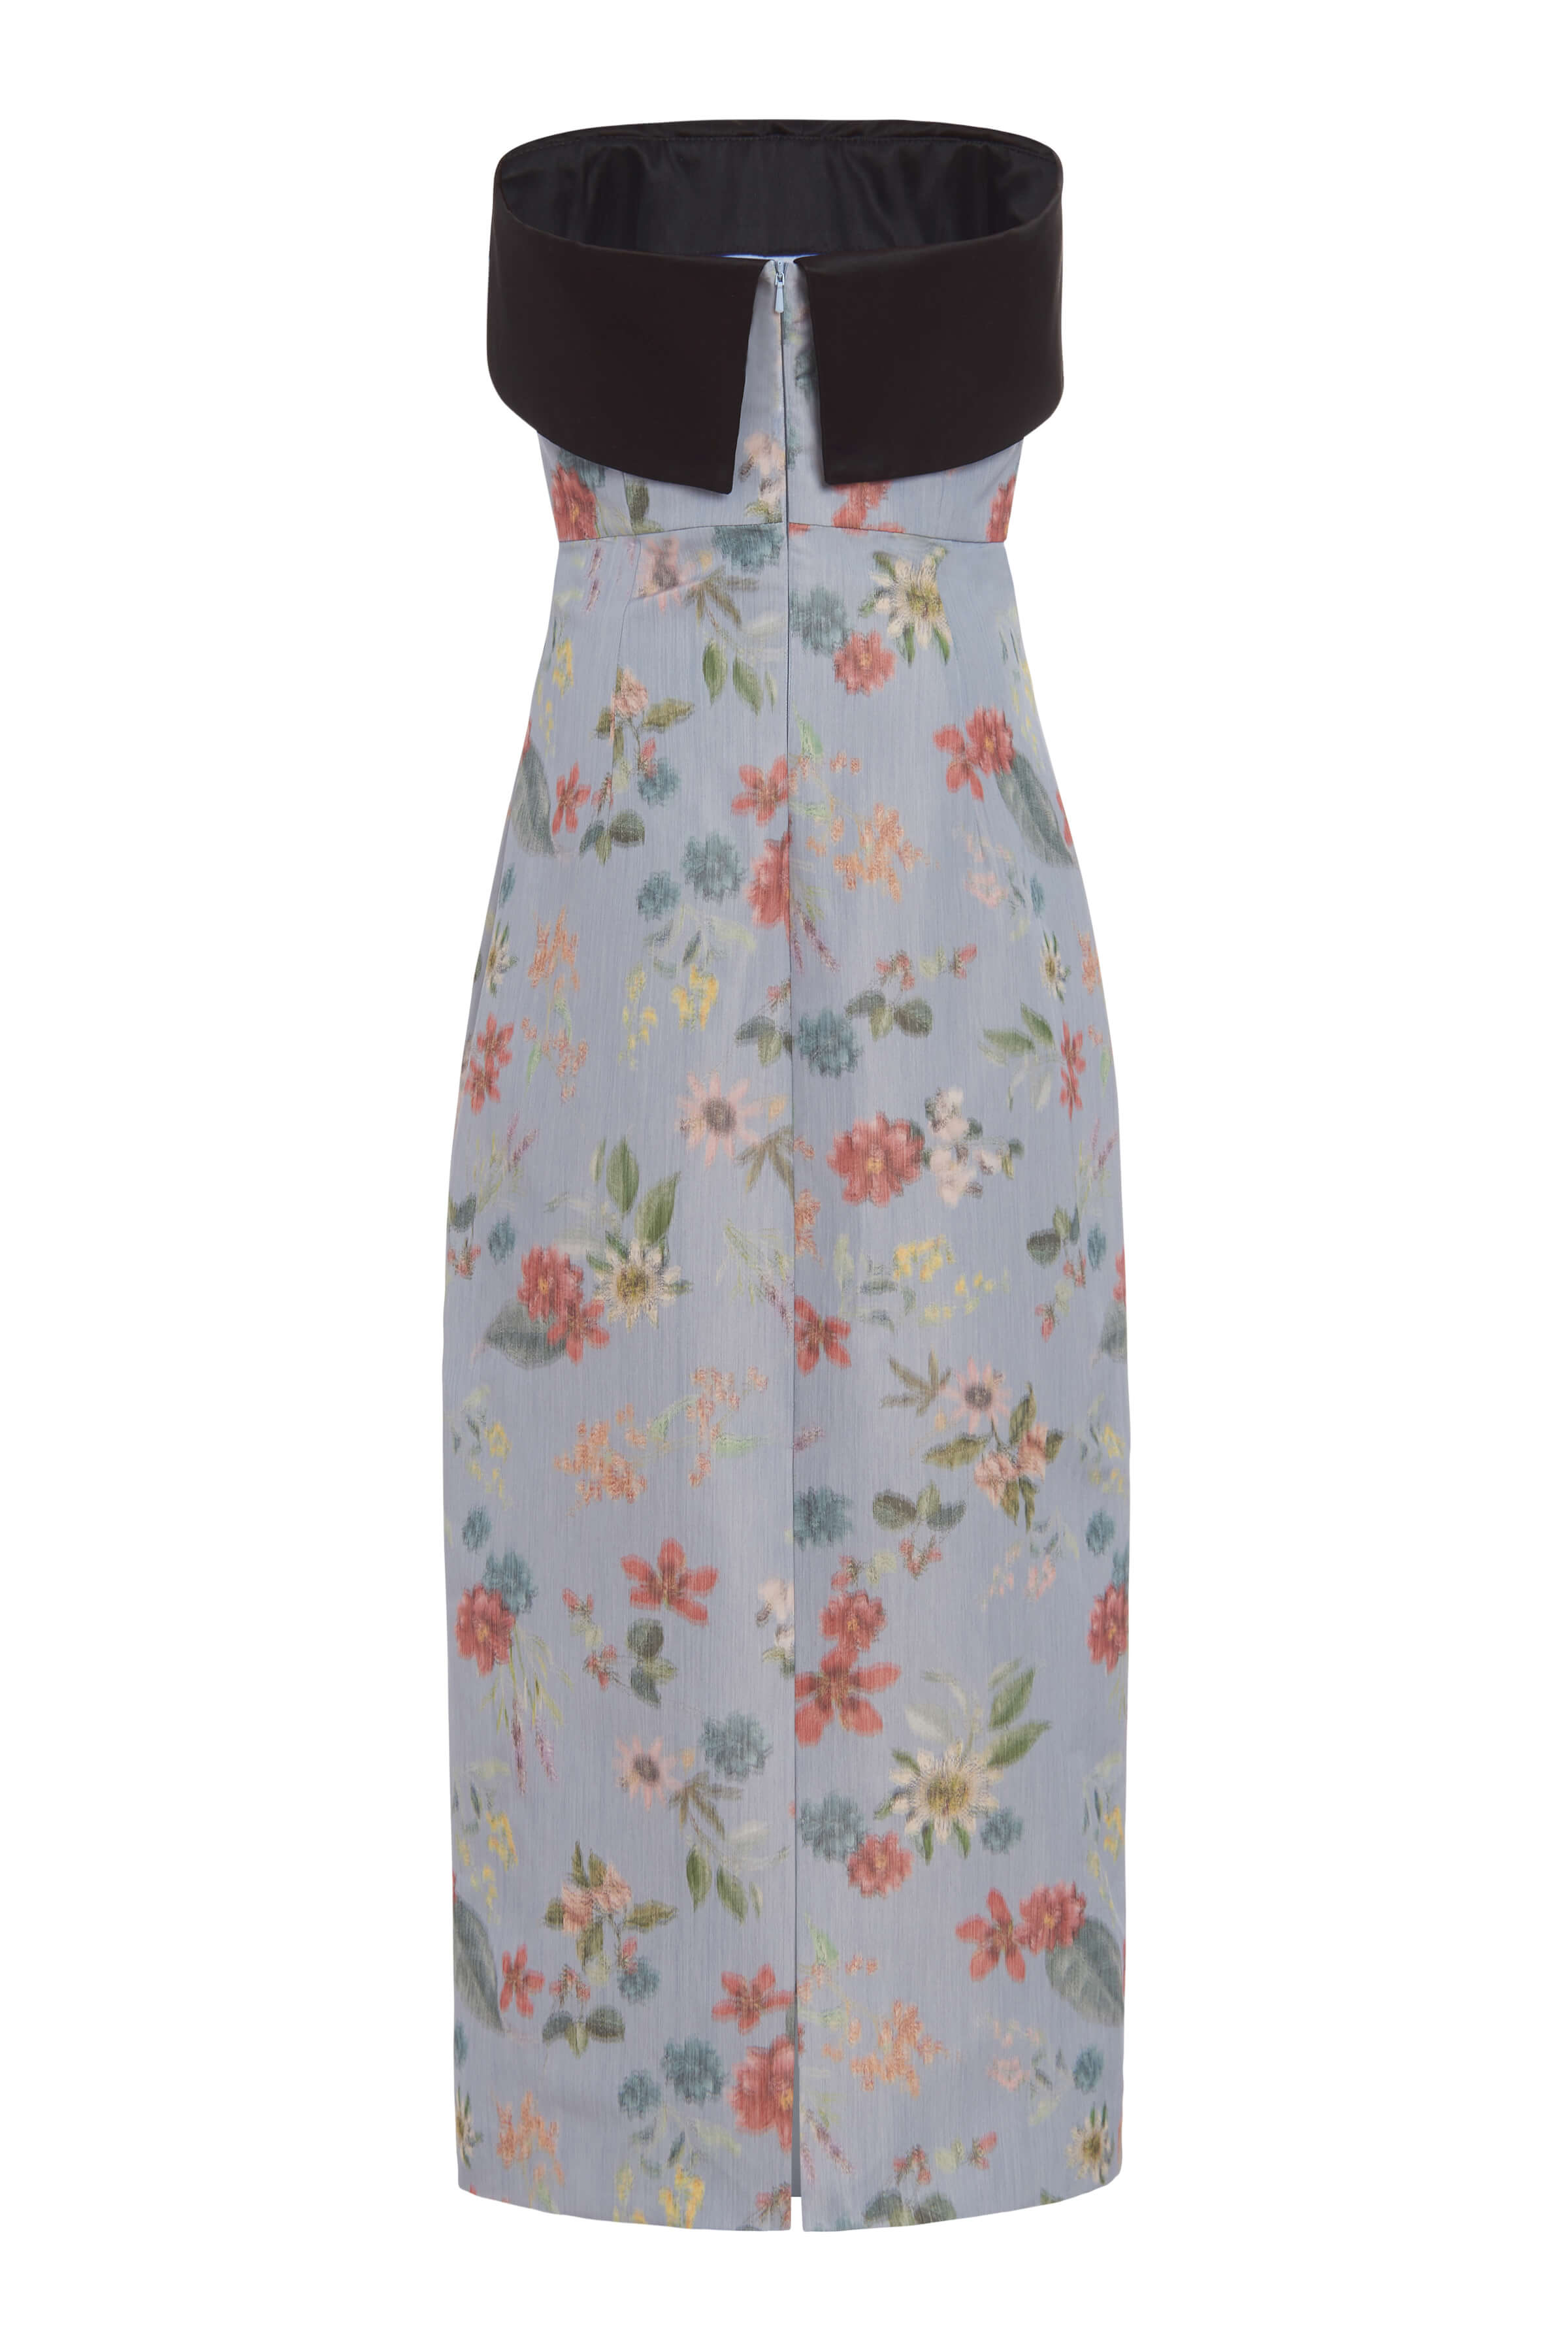 Alondra Strapless Dusty Blue Floral Ikat Column Dress With Contrasting Neckline